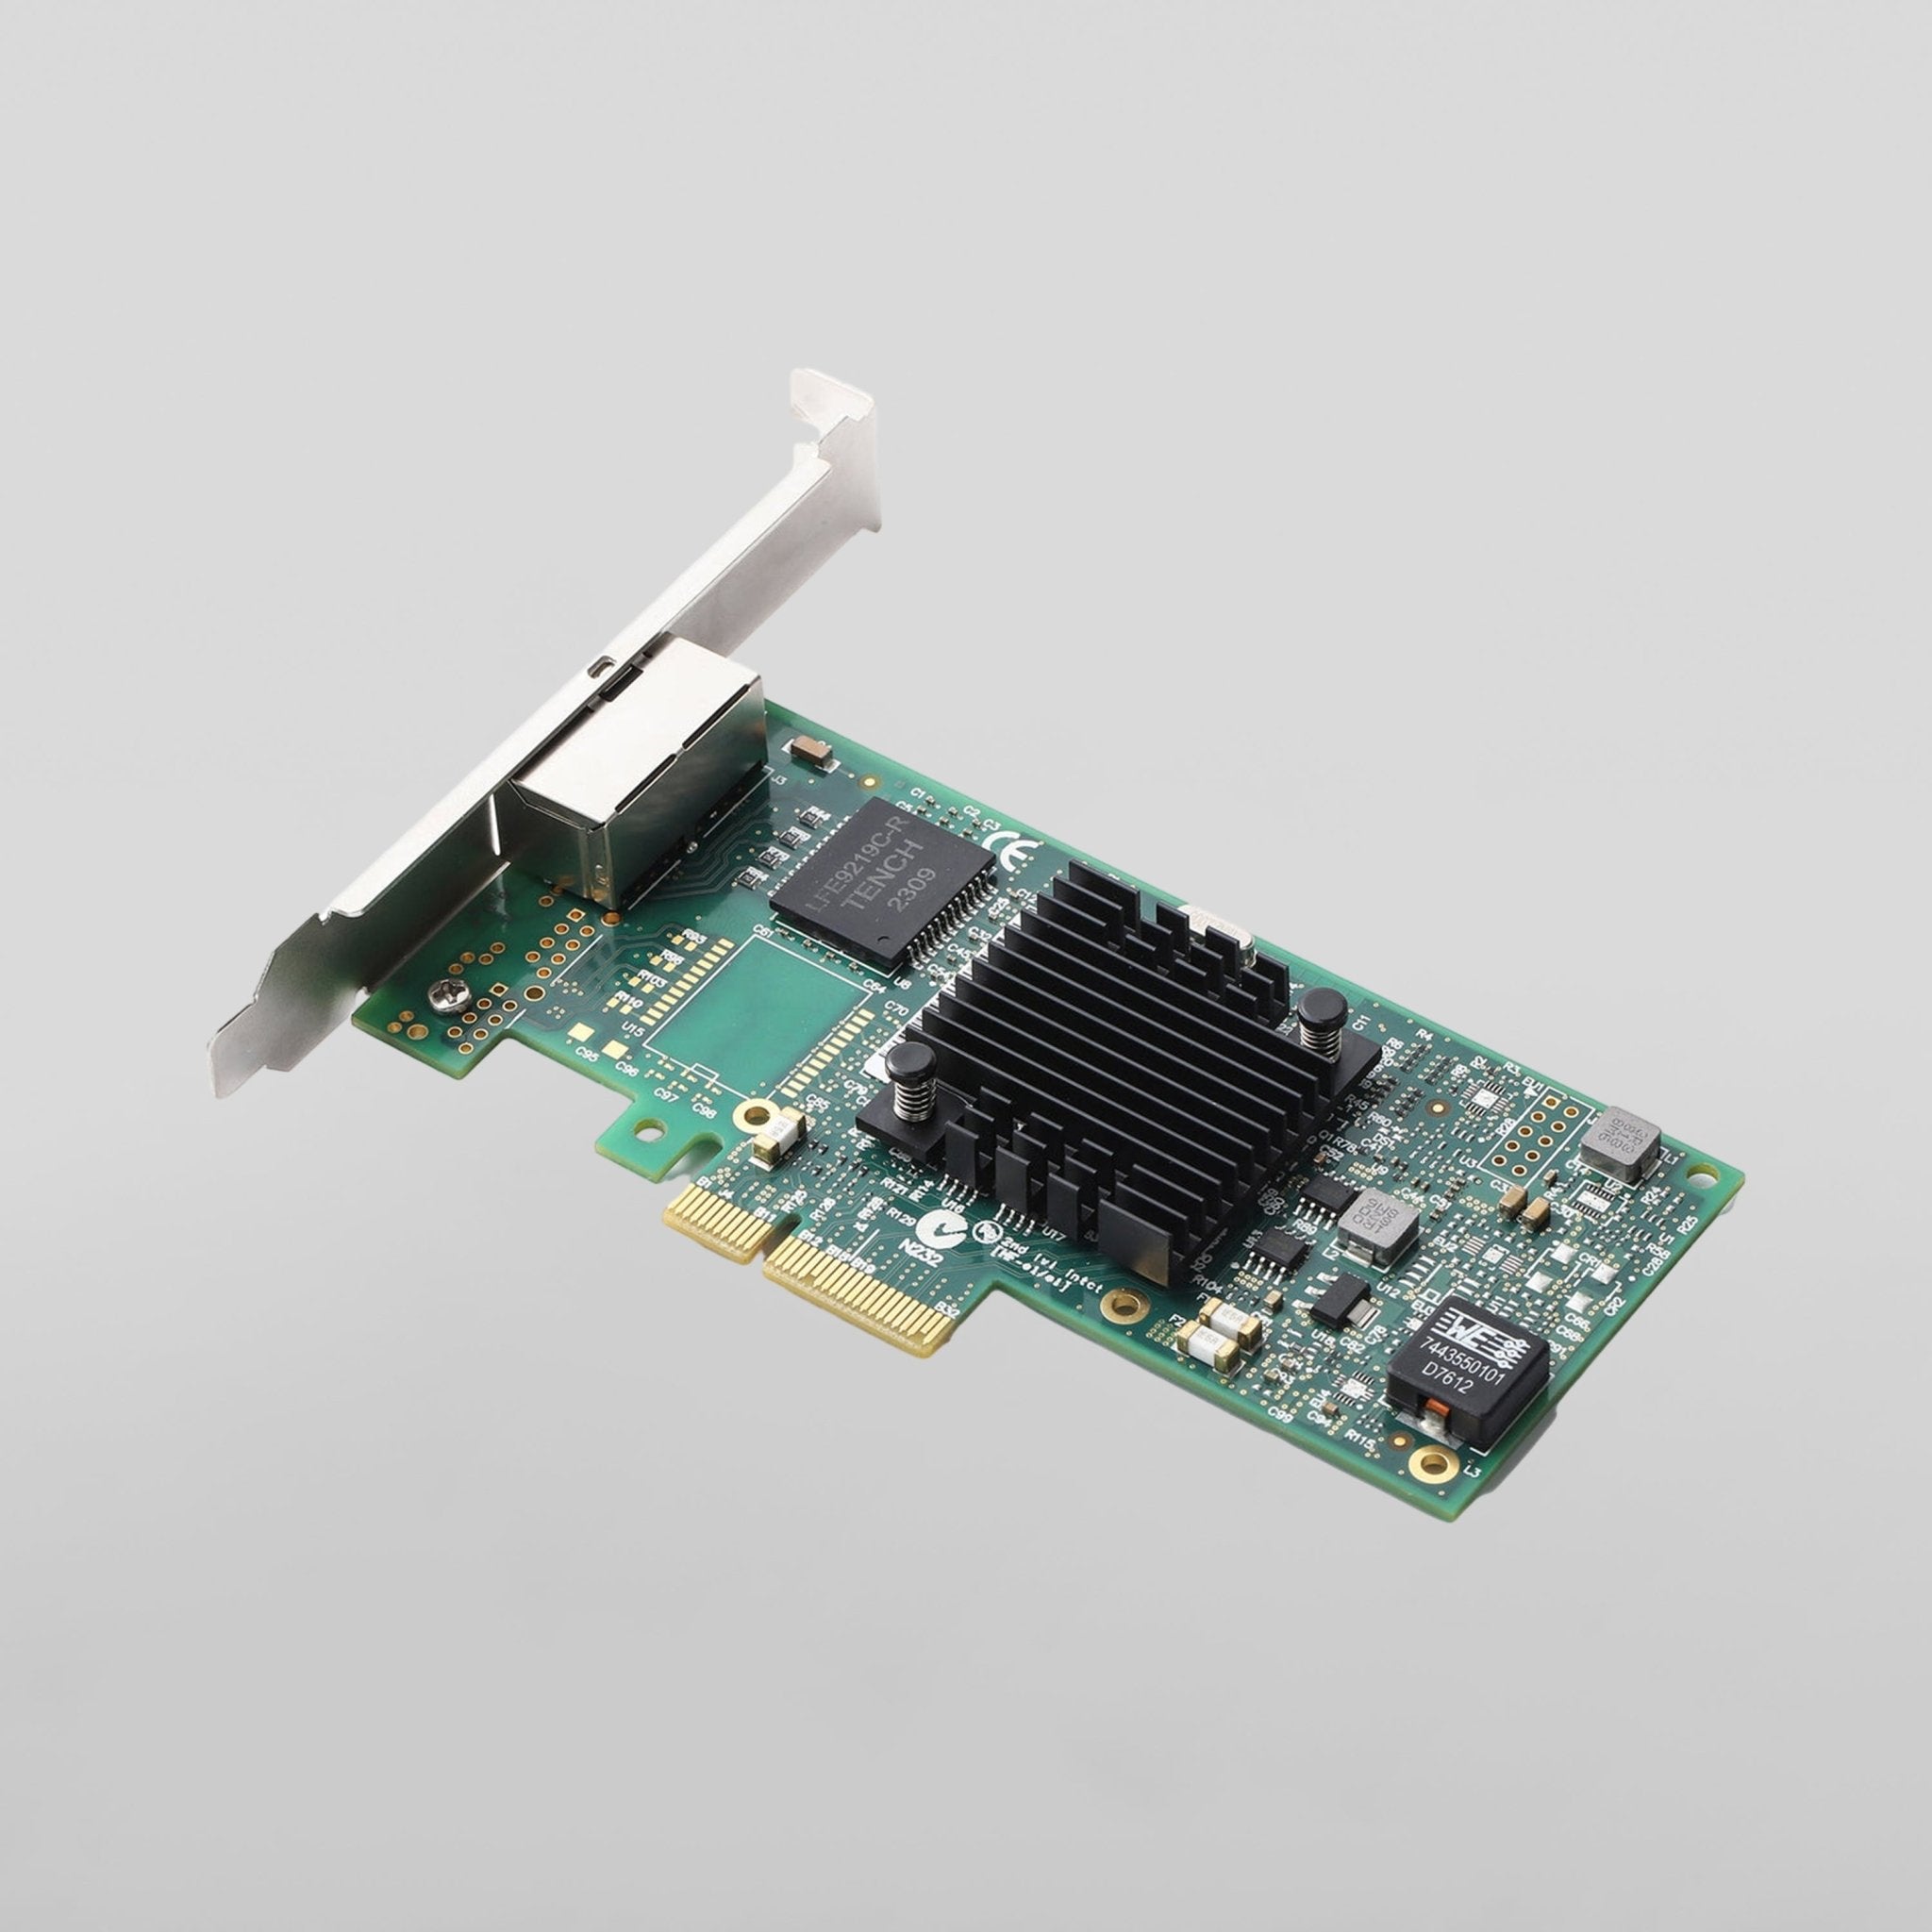 PCIe to 2-Port Ethernet Adapter Intel I350-T2 Chipset - Zima Store Online